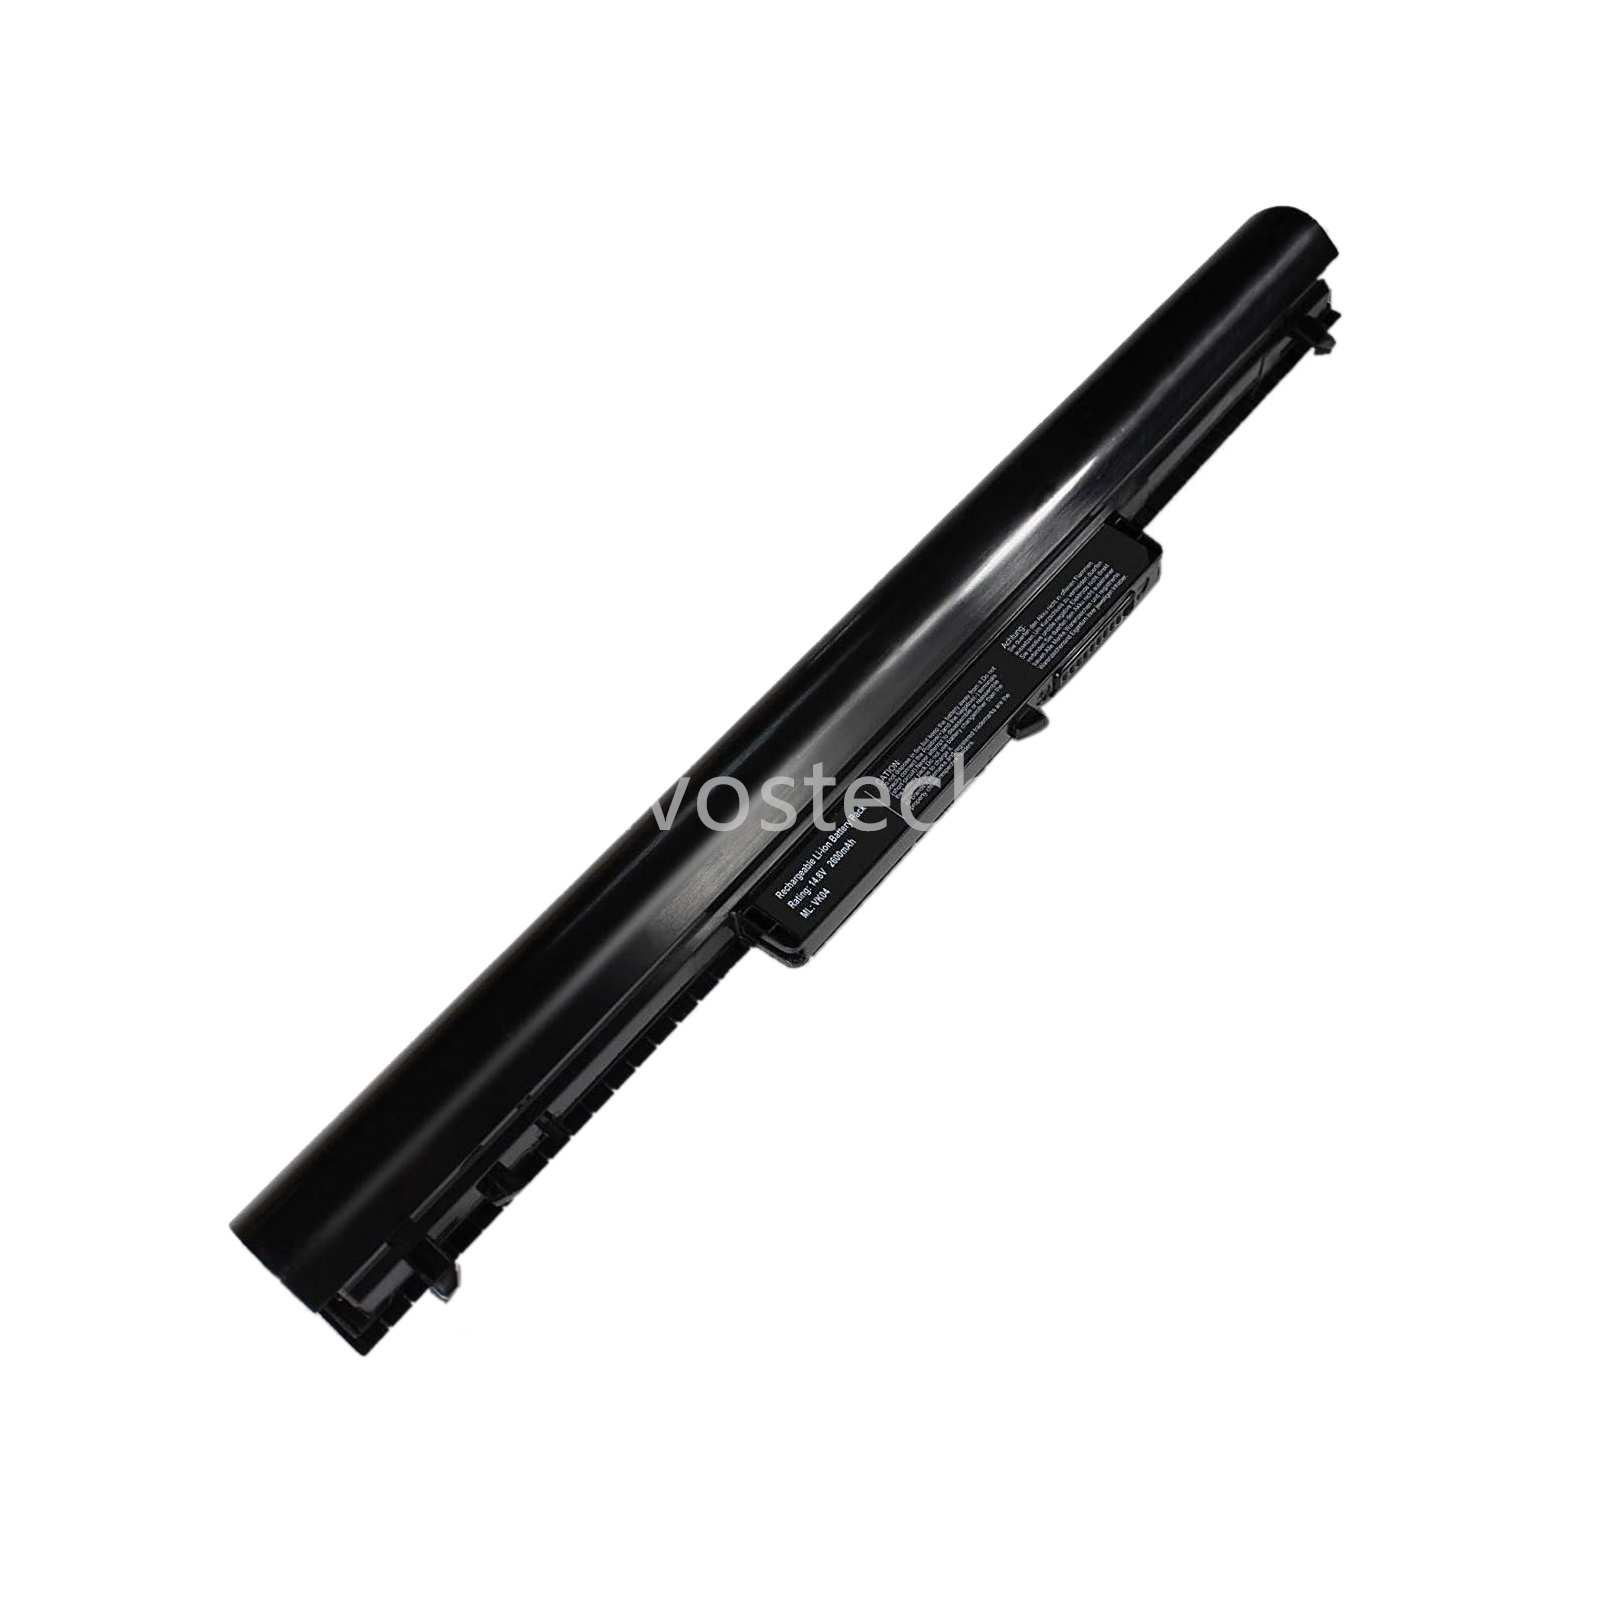 VK04 37Wh 14.8V Replacement Laptop Battery for HP Pavilion Sleekbook 14 14z 15 15t 15z Series